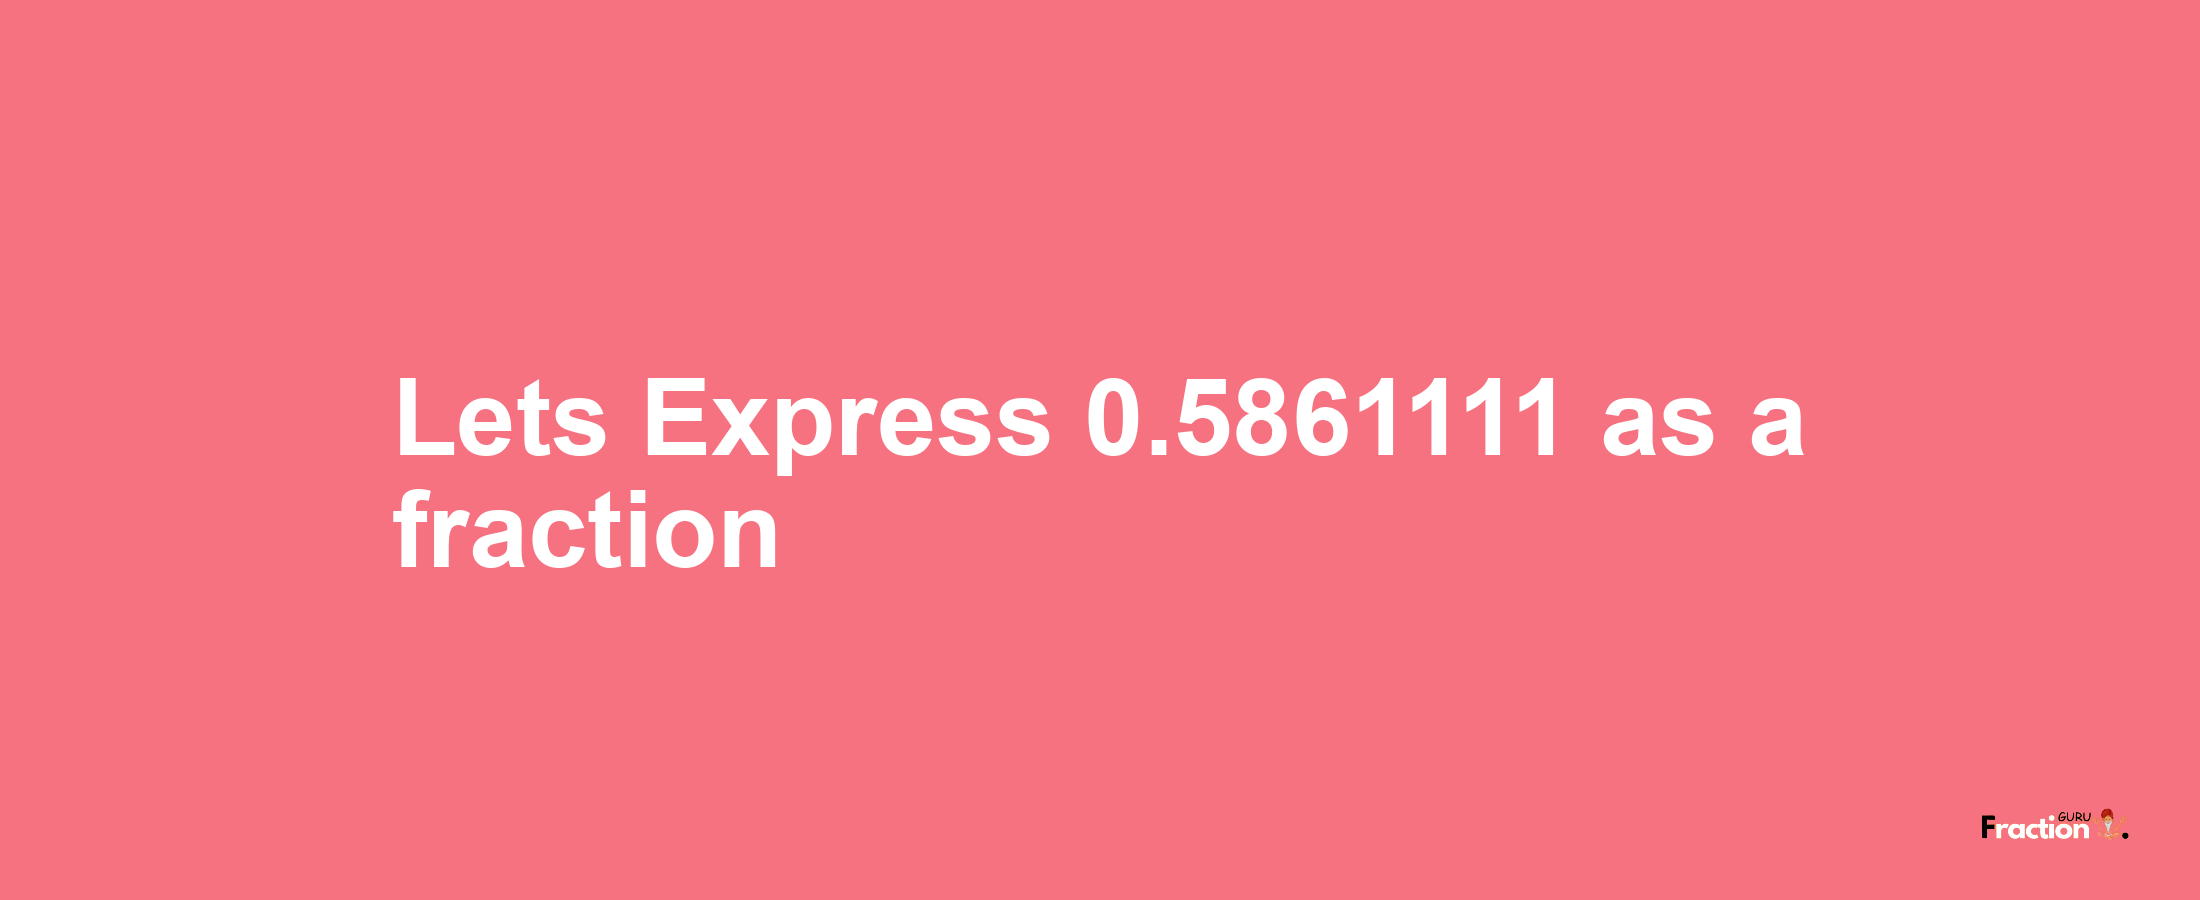 Lets Express 0.5861111 as afraction